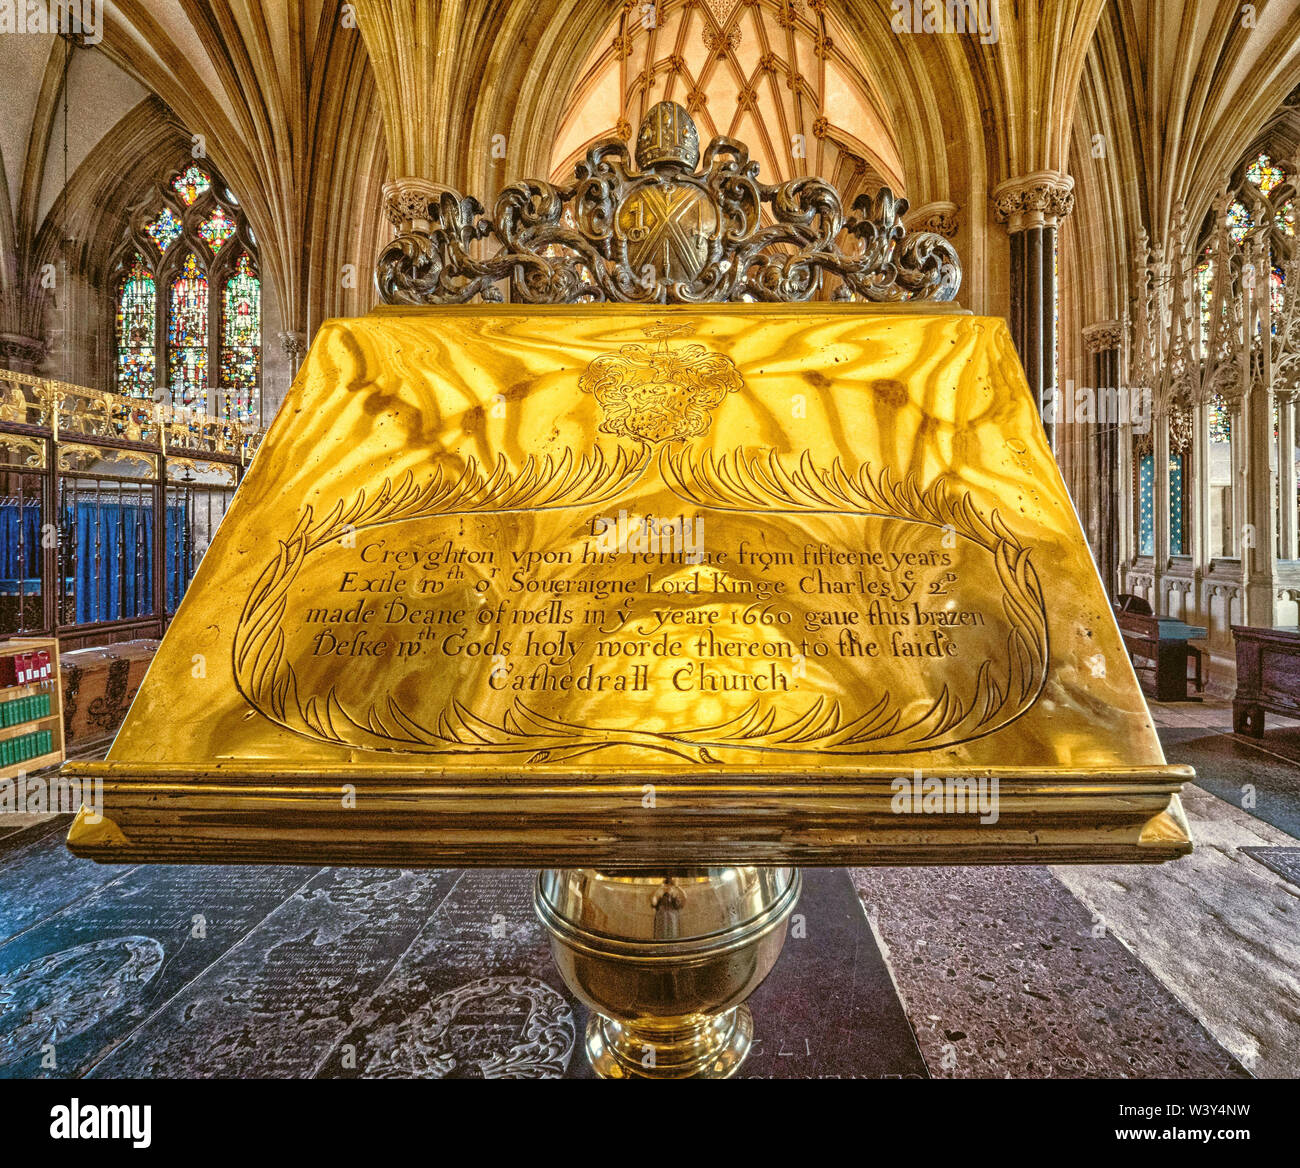 Brass lectern in Wells Catherdral Somerset UK donated by Robert Creyghton (Crighton) Dean of Wells from 1660 Stock Photo